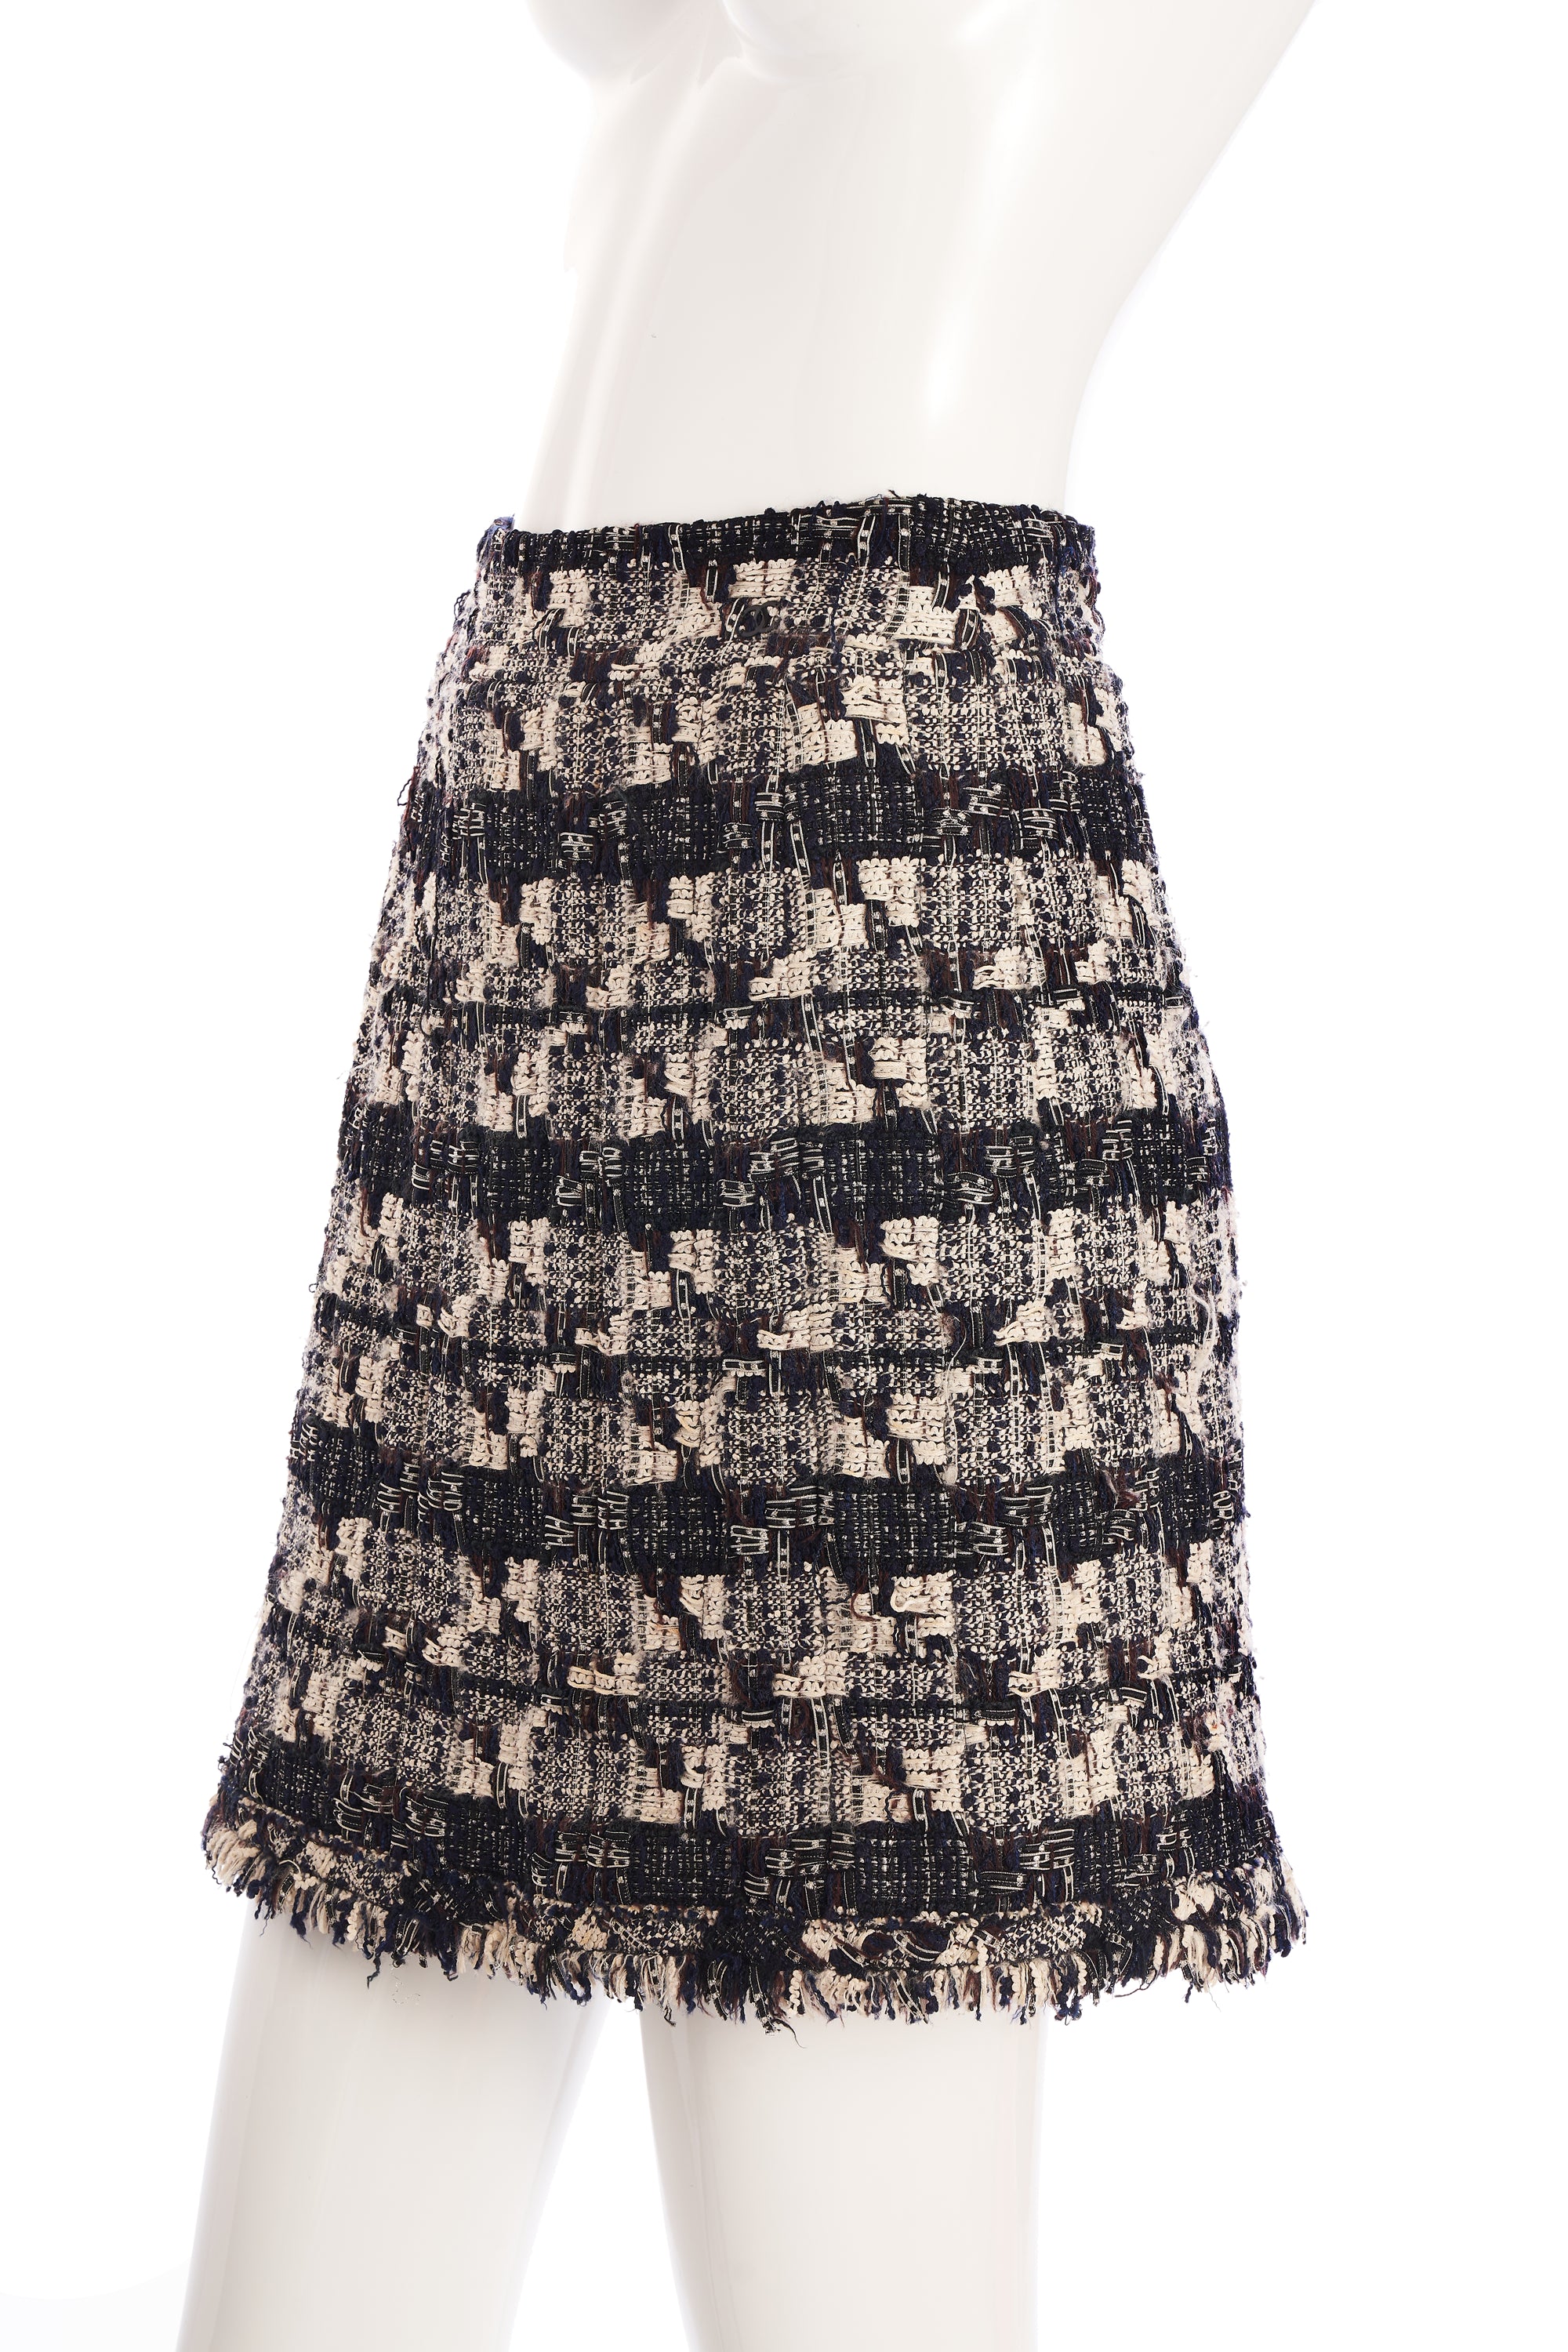 Chanel Black and White Tweed Jacket With Skirt